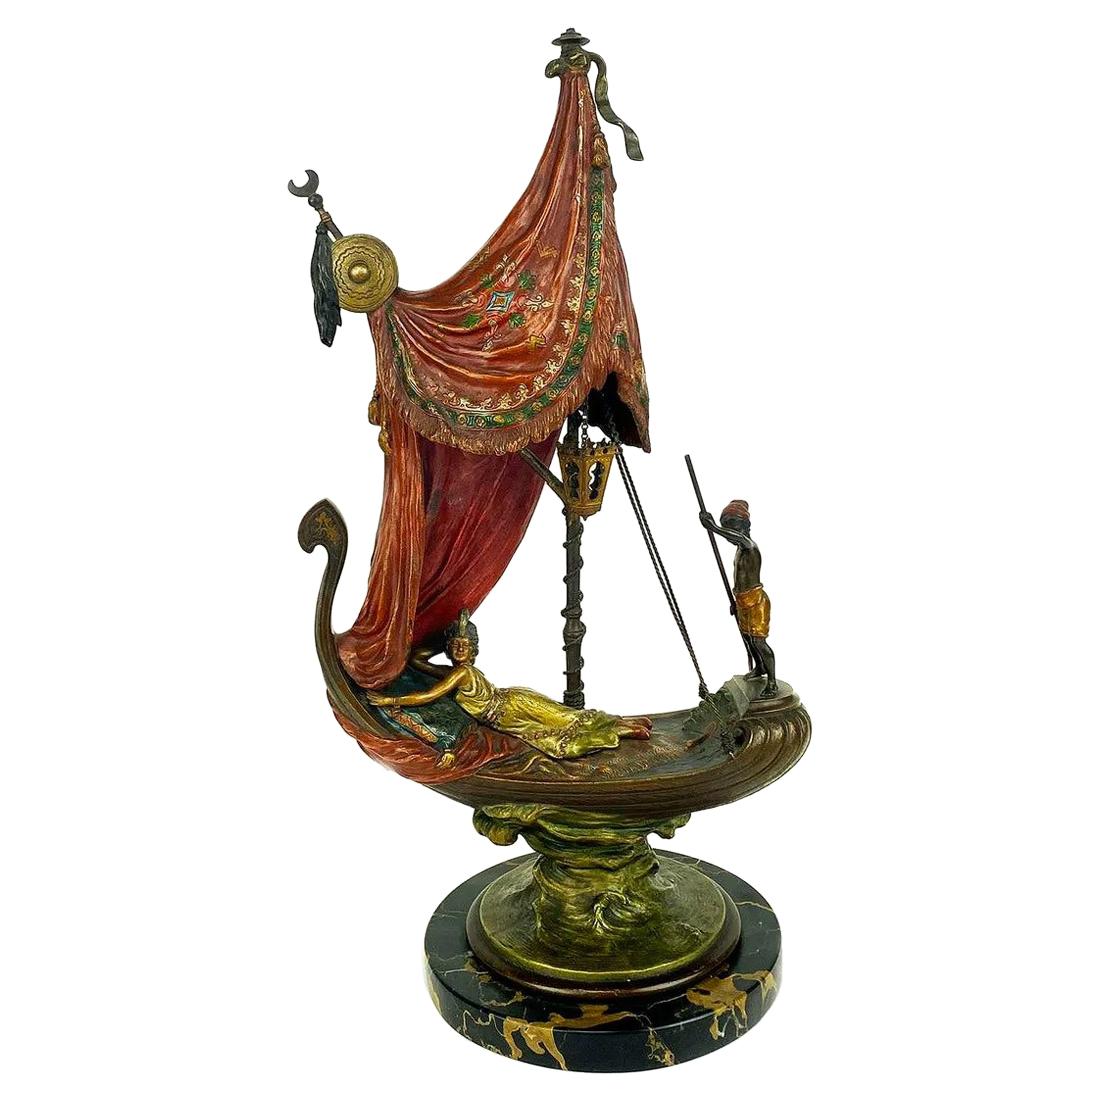 Fabulous Orientalist Figural Cold Painted Bronze Lamp and Sculpture by Bergmann For Sale